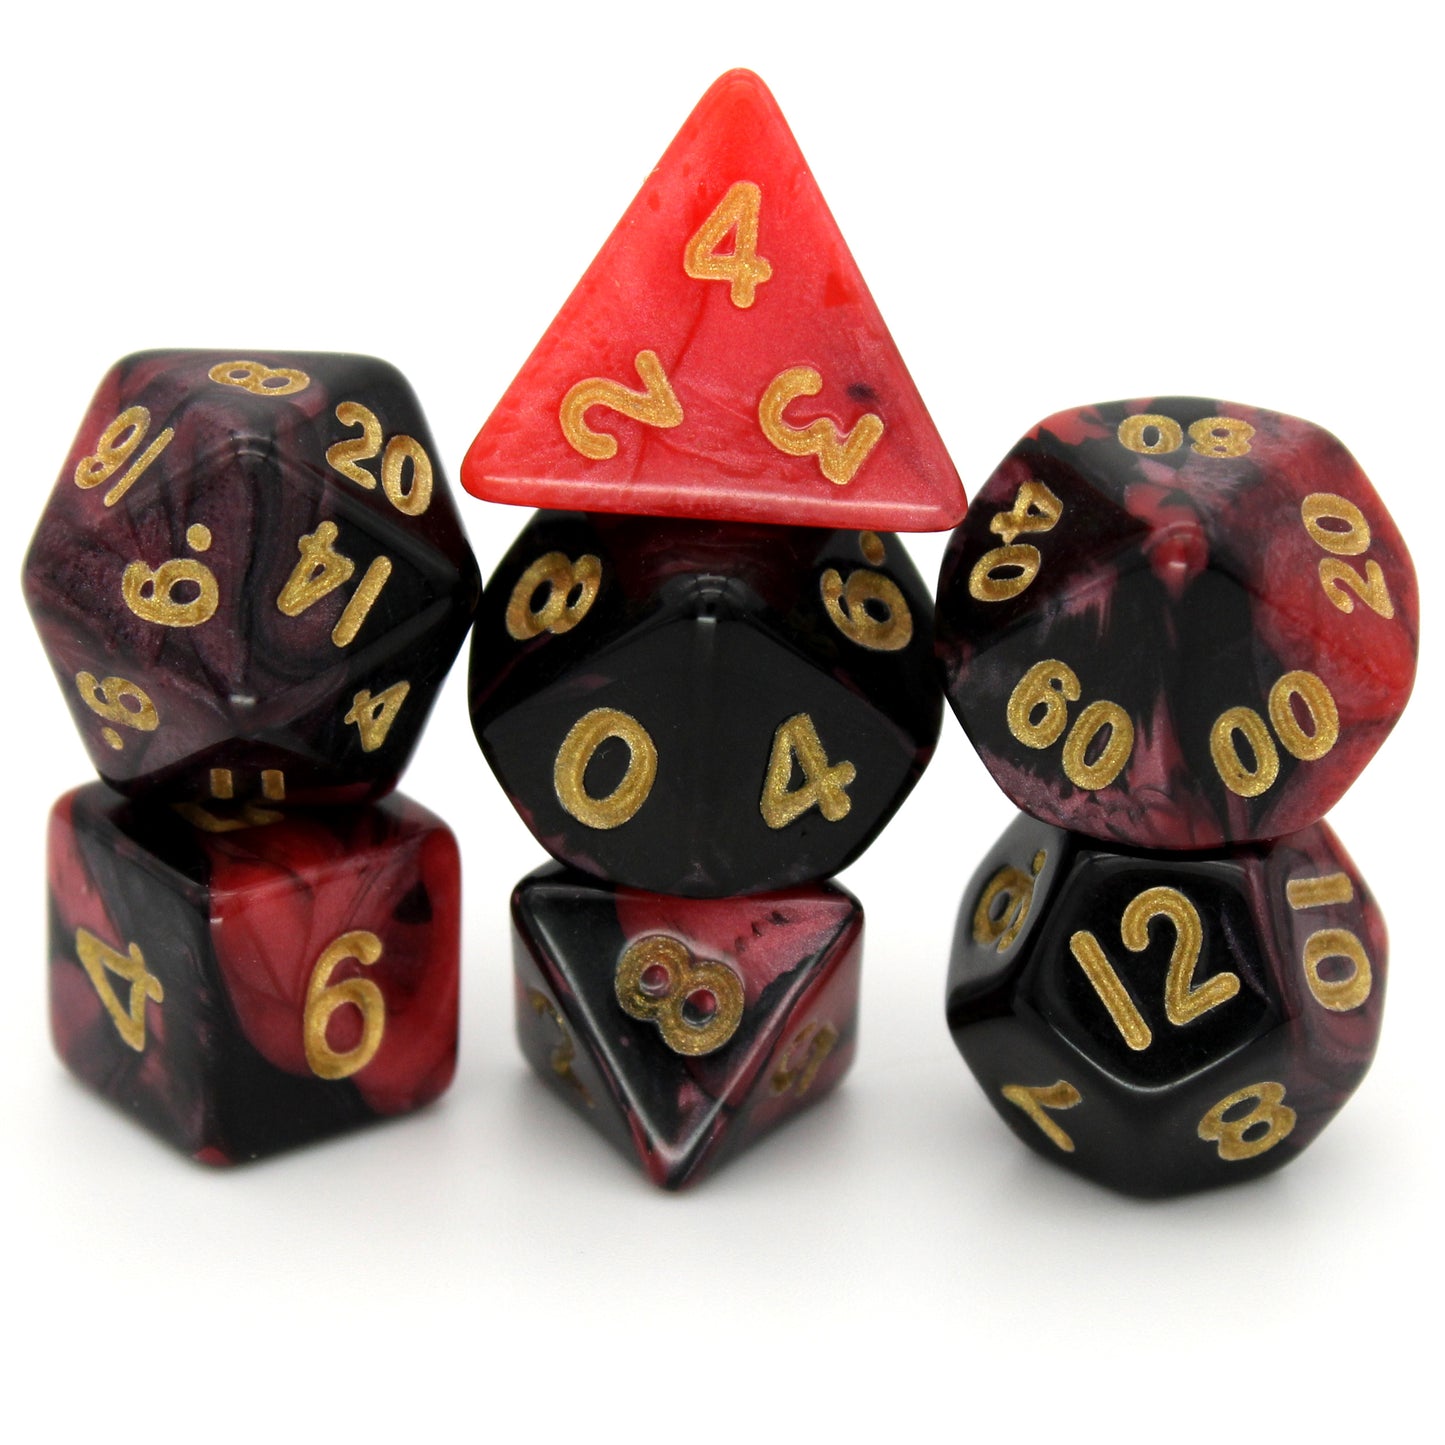 D'monic is a 7-piece 13mm resin dice set with swirls of black and red, inked in gold. It belongs to our tiny but mighty Wee Lads collection.